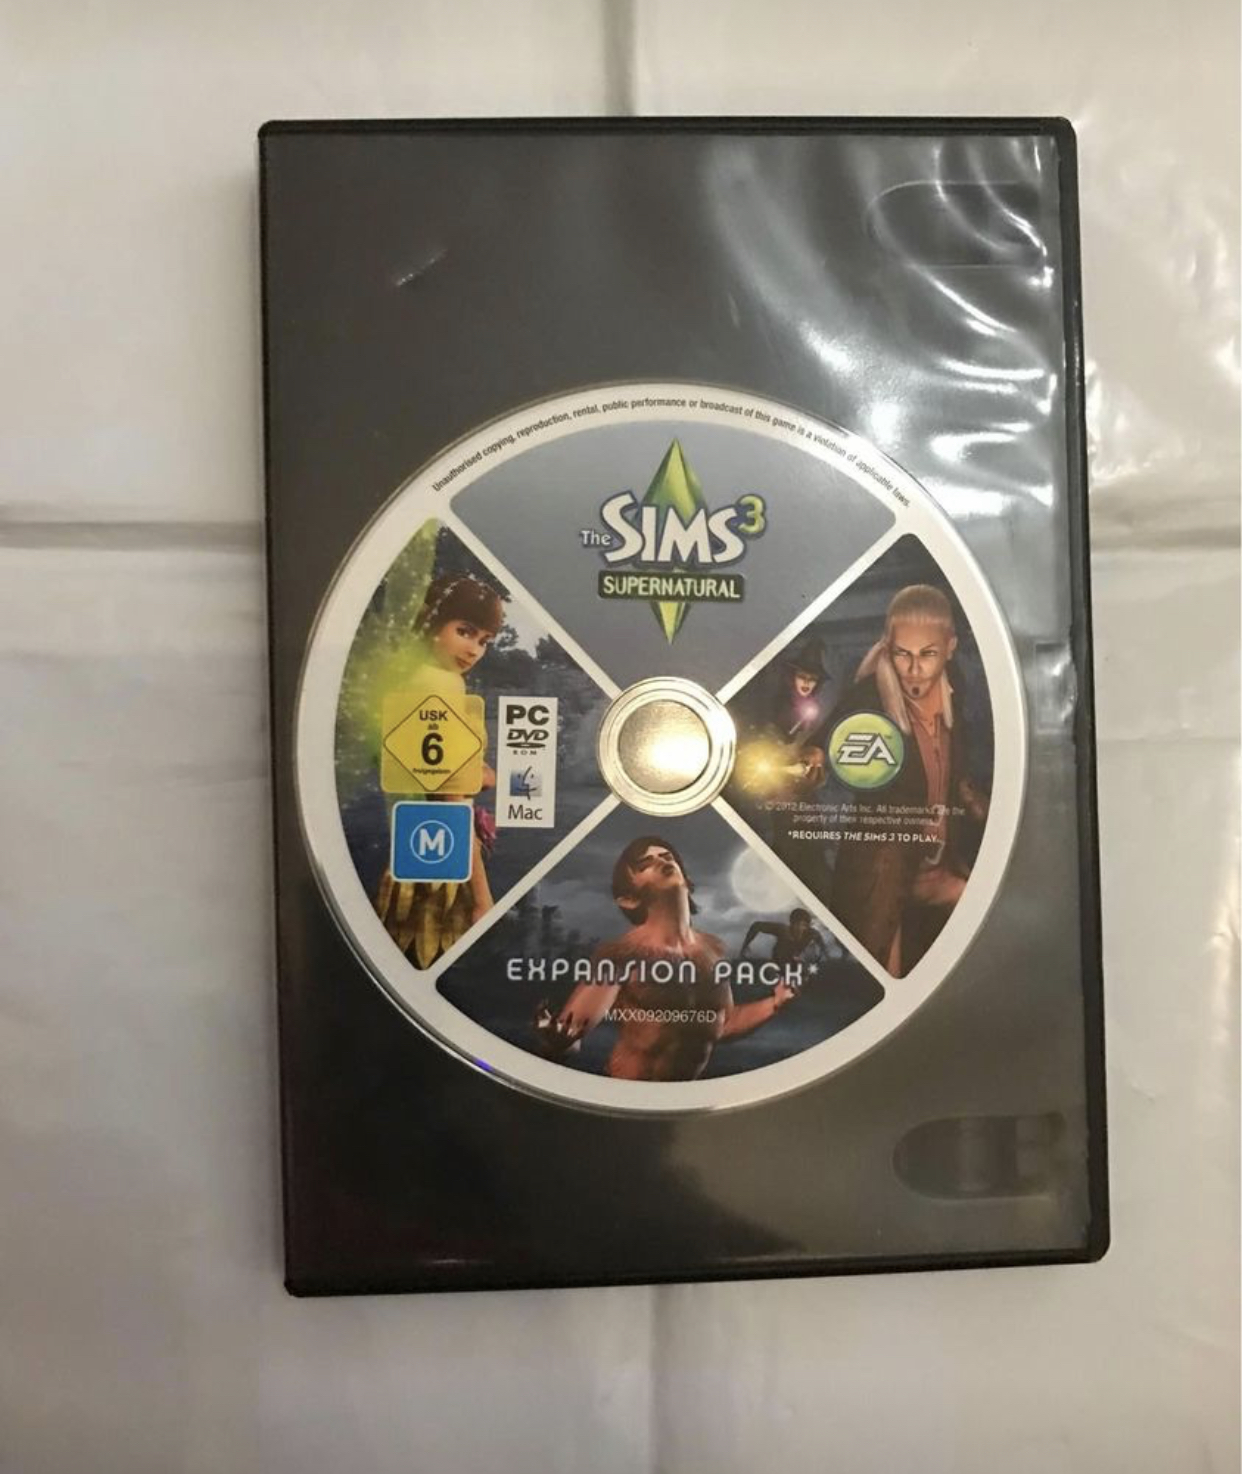 The sims 3 supernatural PC game expansion pack